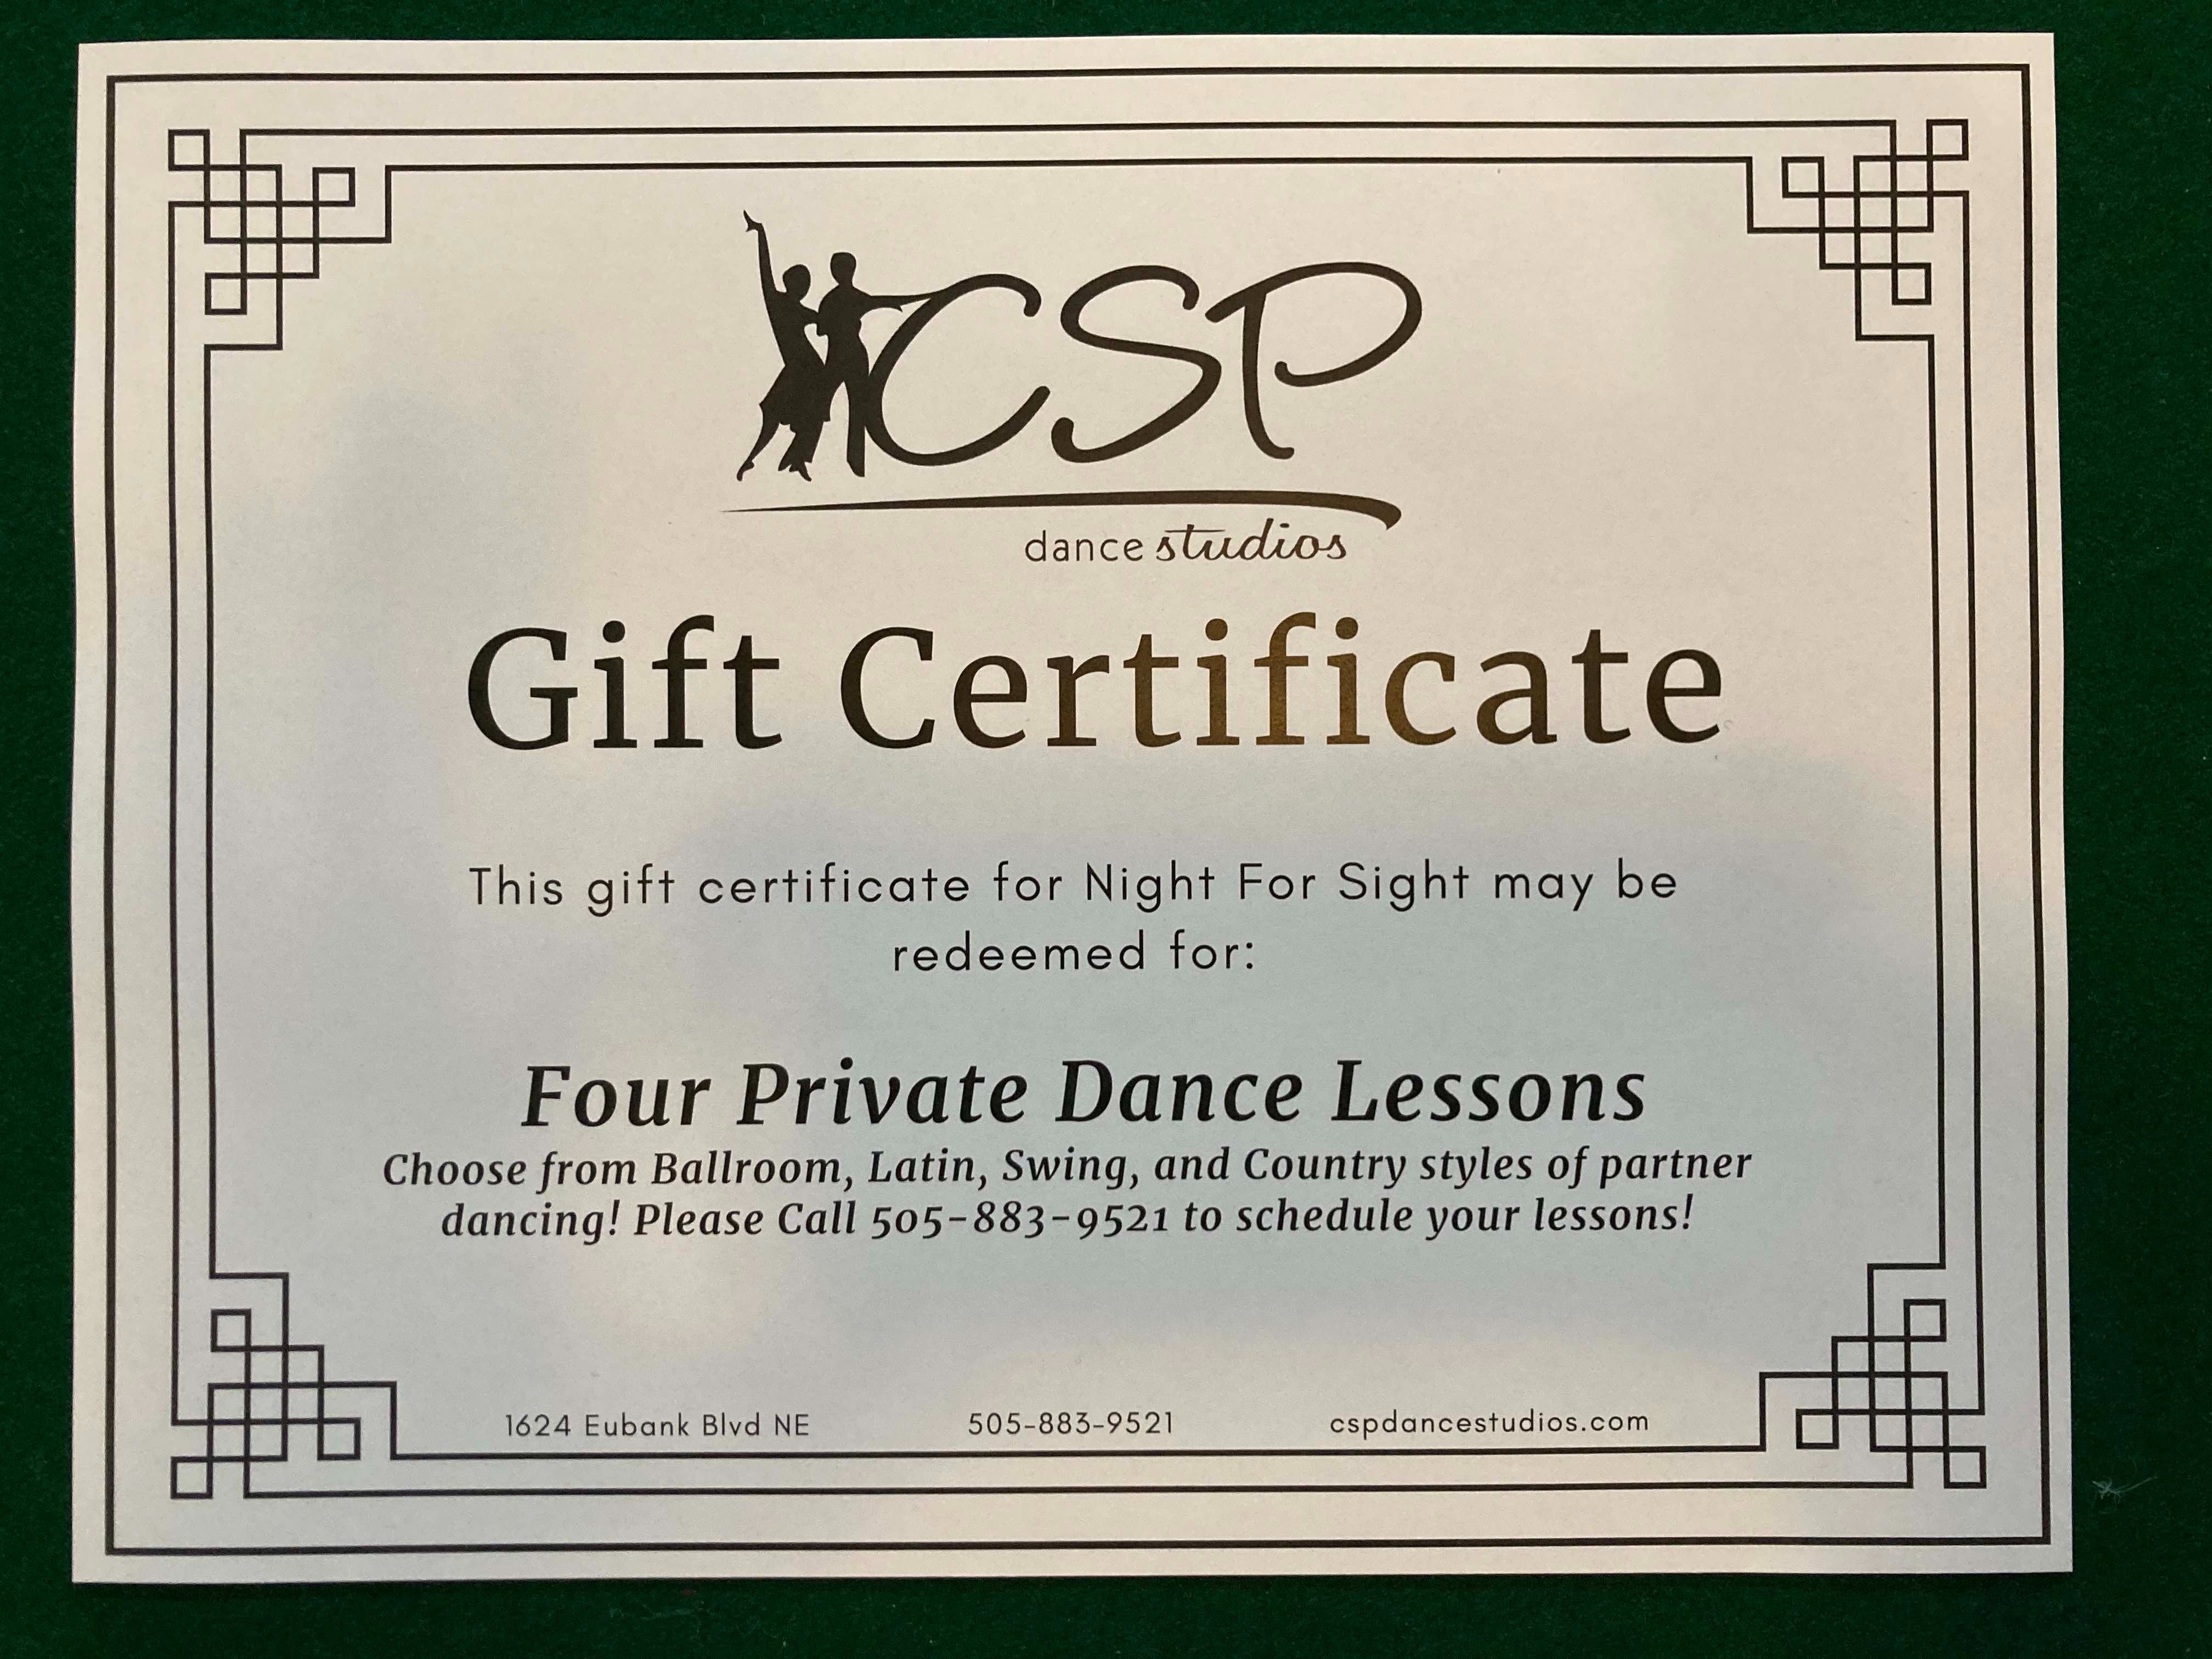 4 private dance lessons, your choice of Ballroom, Latin, Swing, and Country